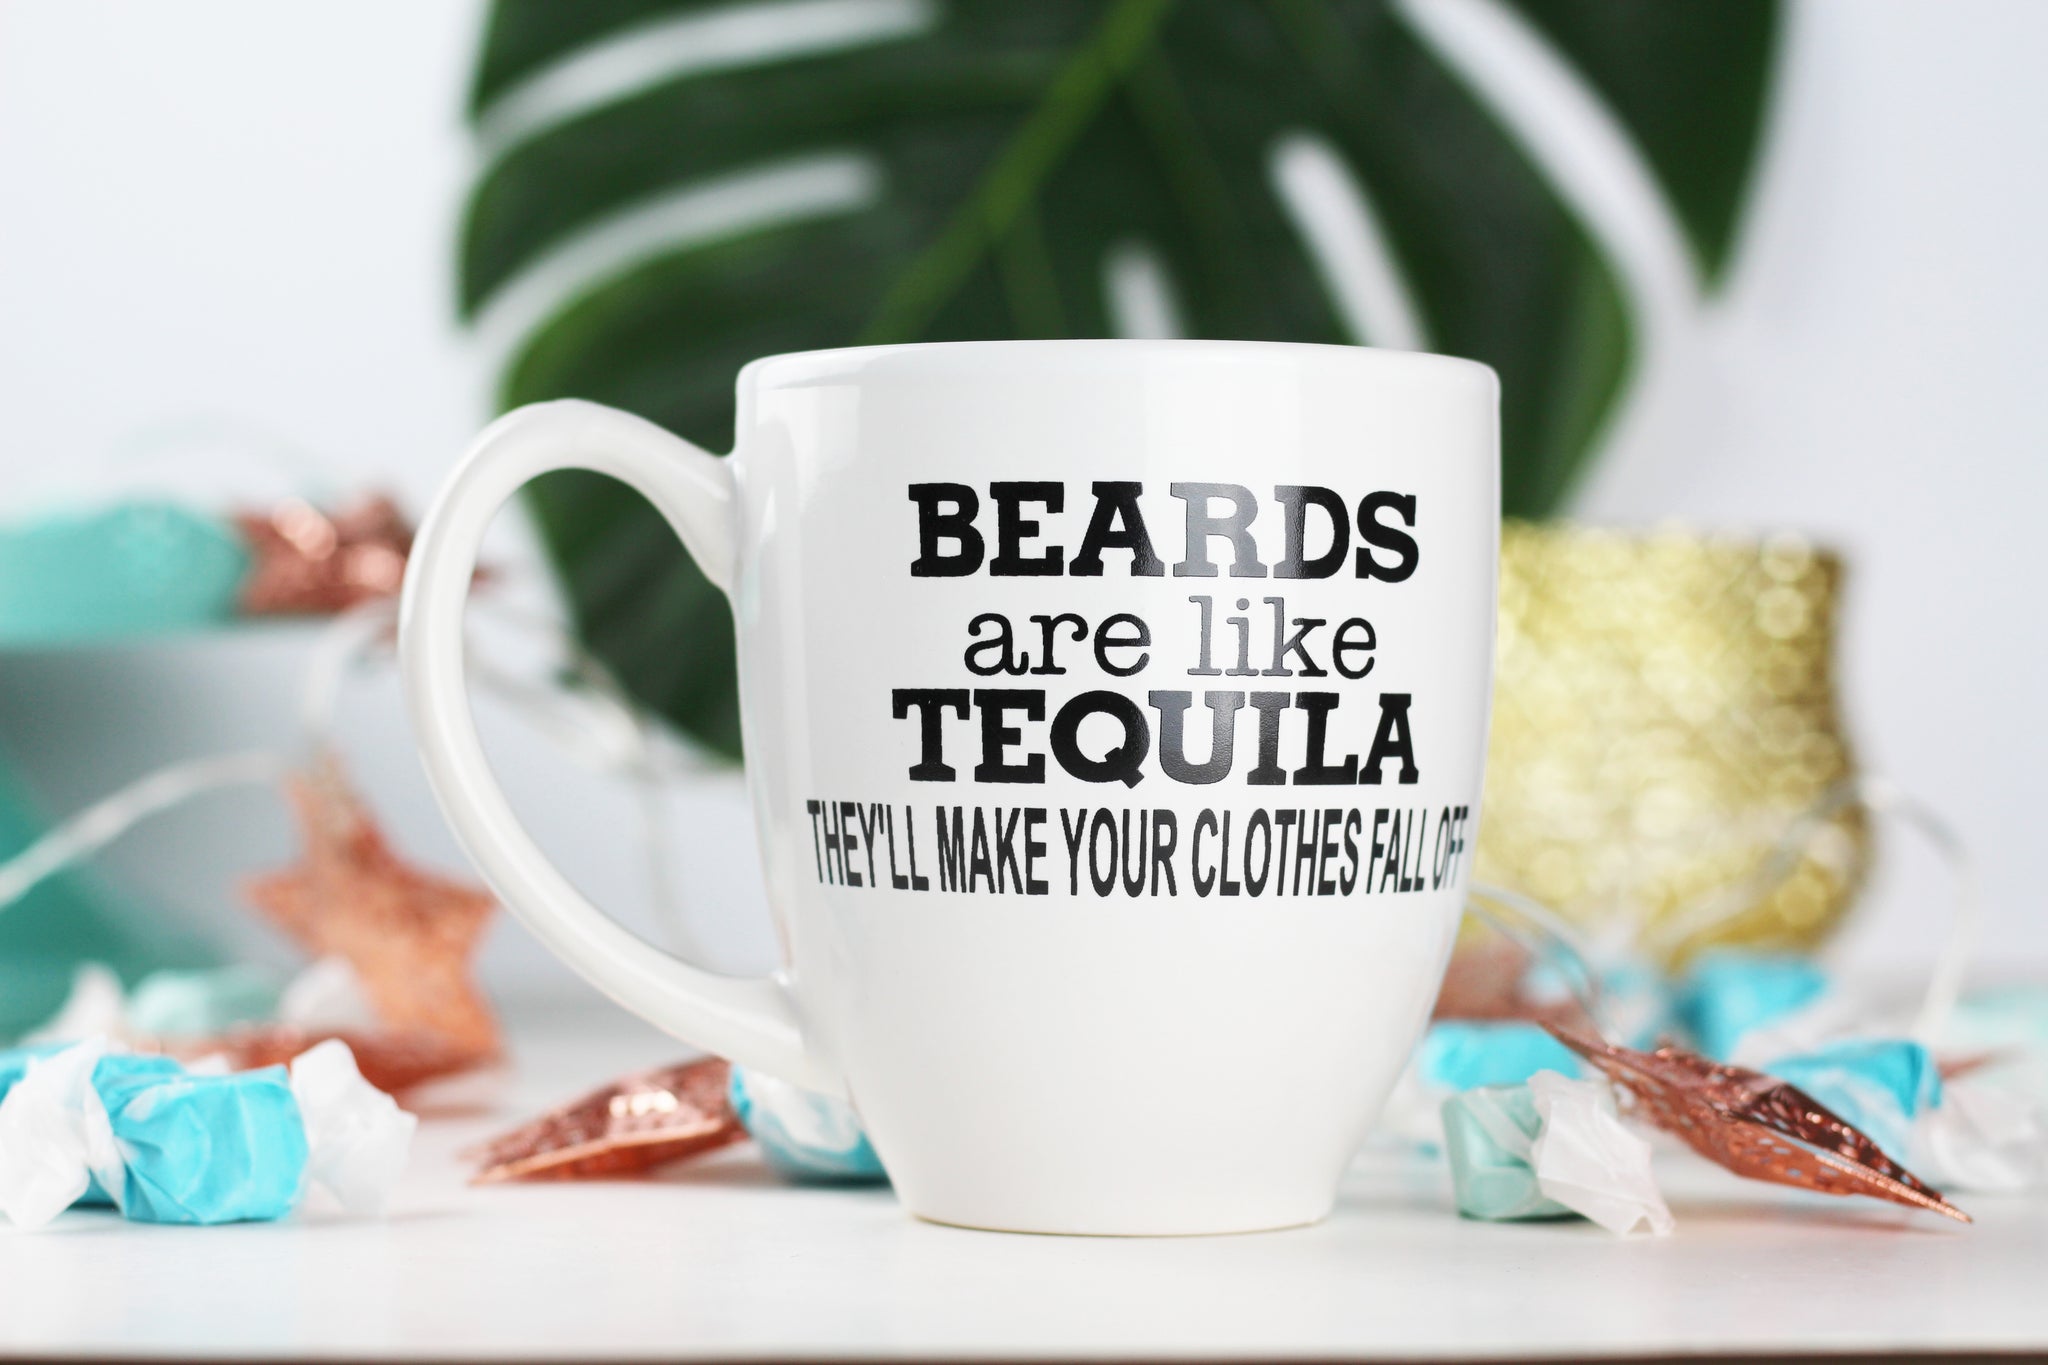 Beards are like tequila, they'll make your clothes fall off